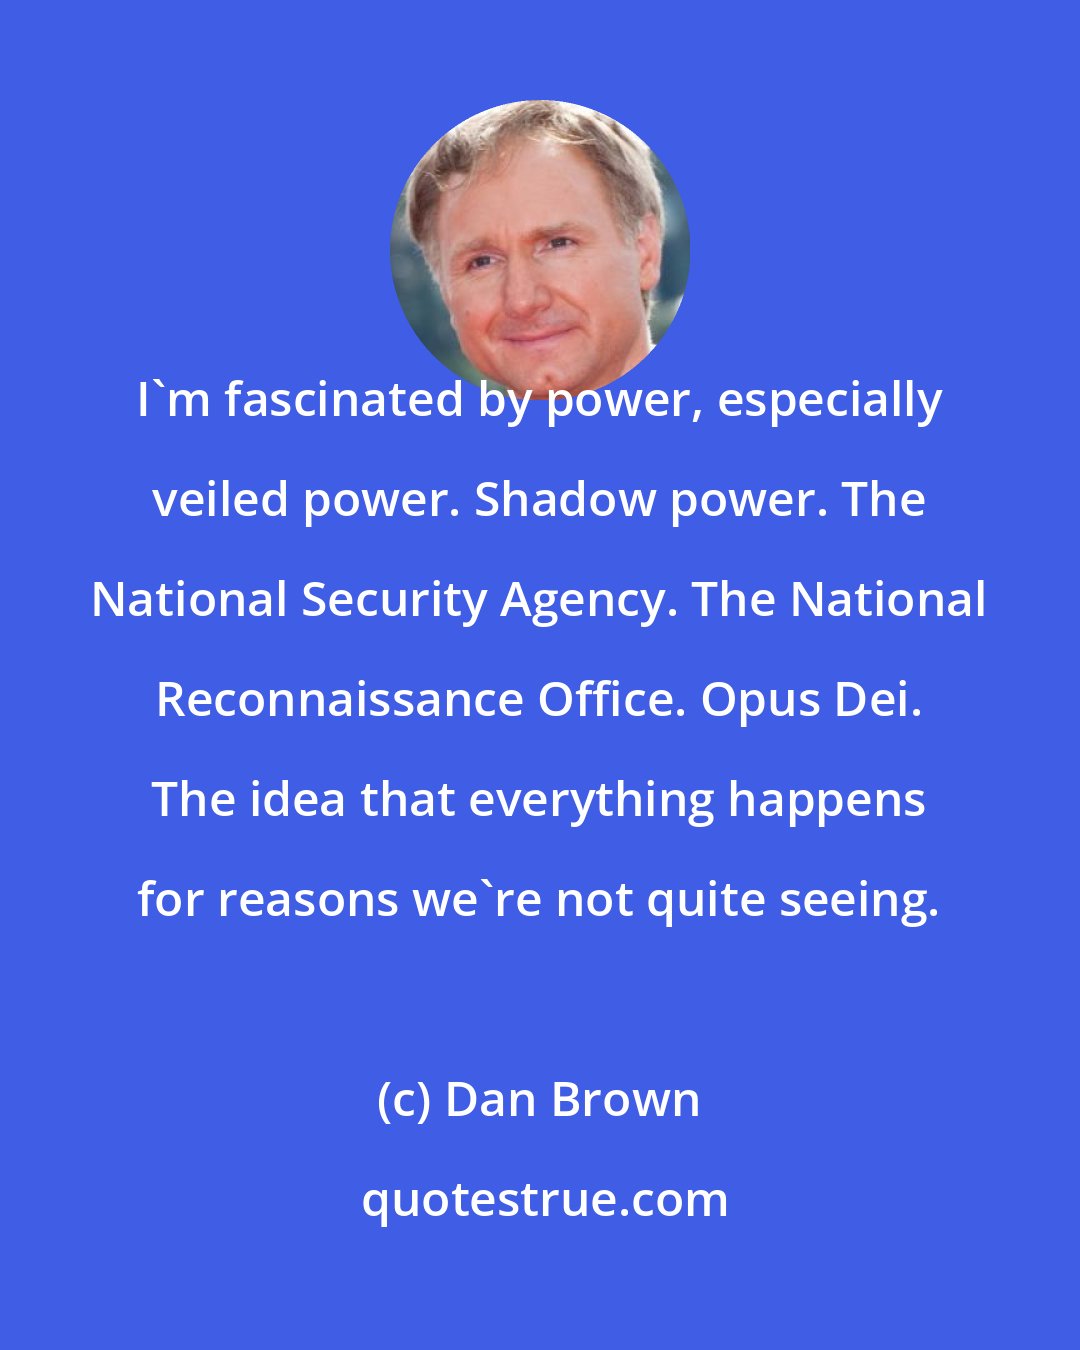 Dan Brown: I'm fascinated by power, especially veiled power. Shadow power. The National Security Agency. The National Reconnaissance Office. Opus Dei. The idea that everything happens for reasons we're not quite seeing.